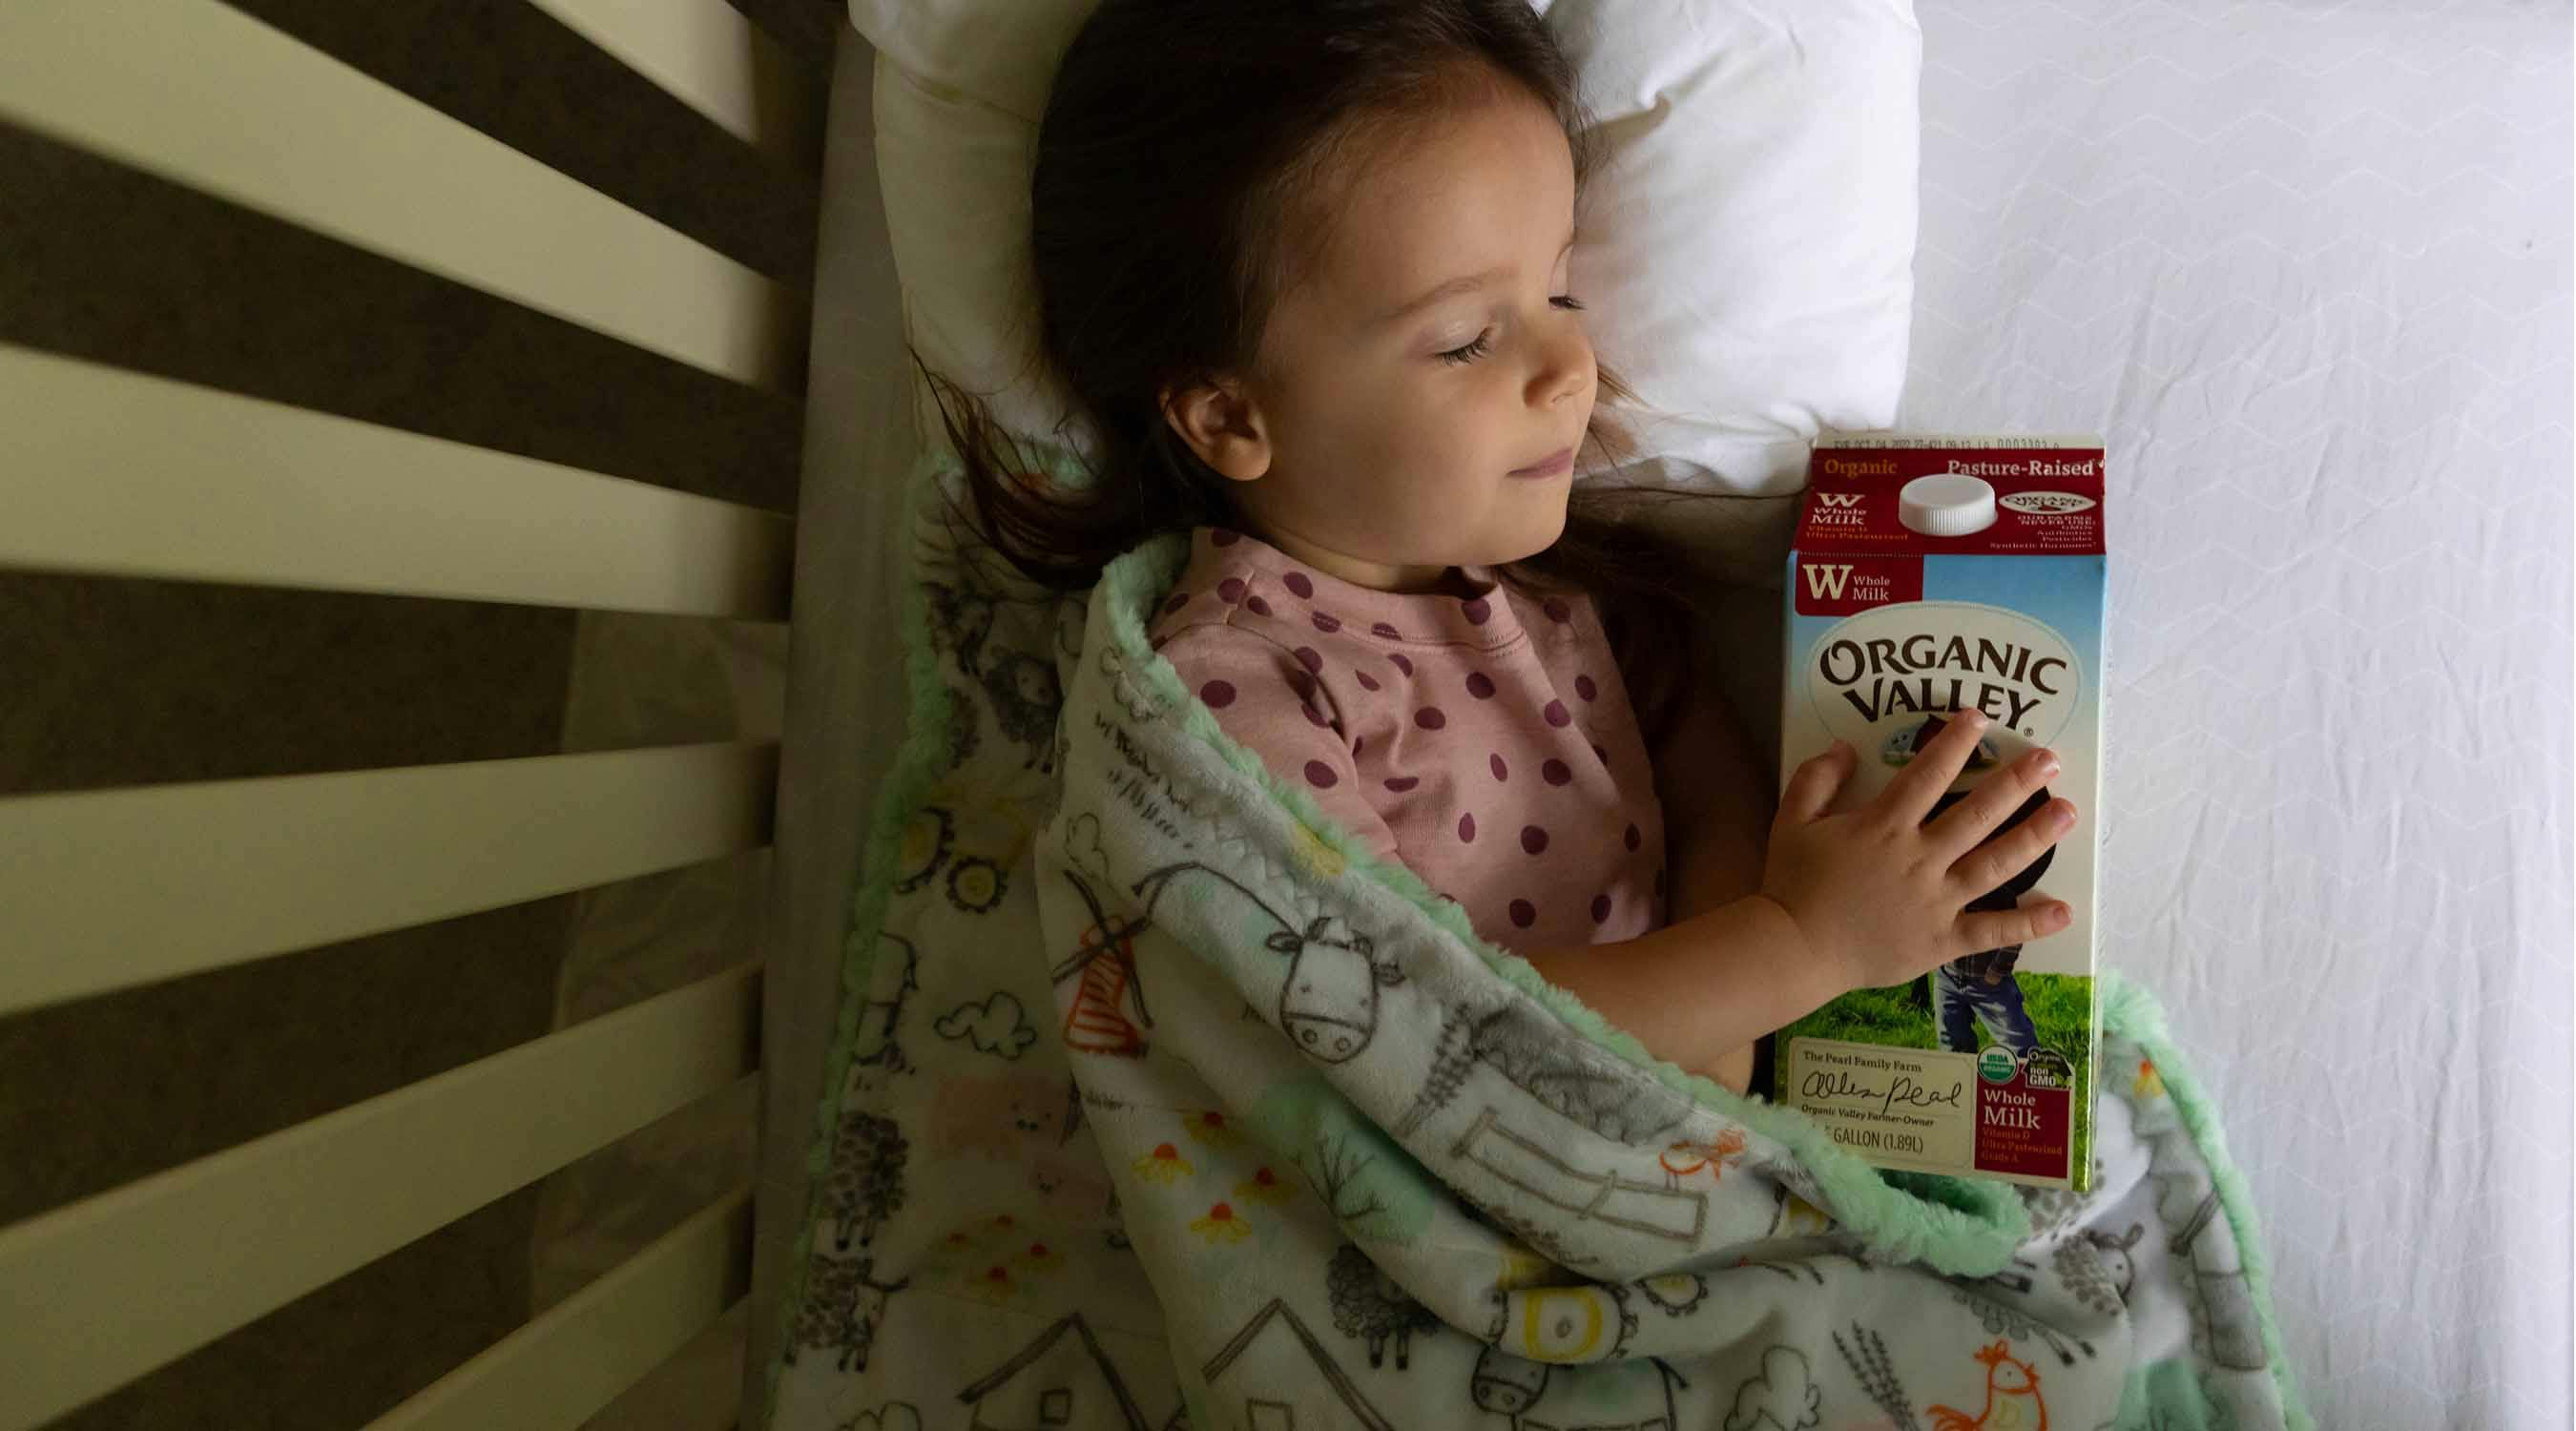 A toddler sleeps while holding milk.Organic Valley Image